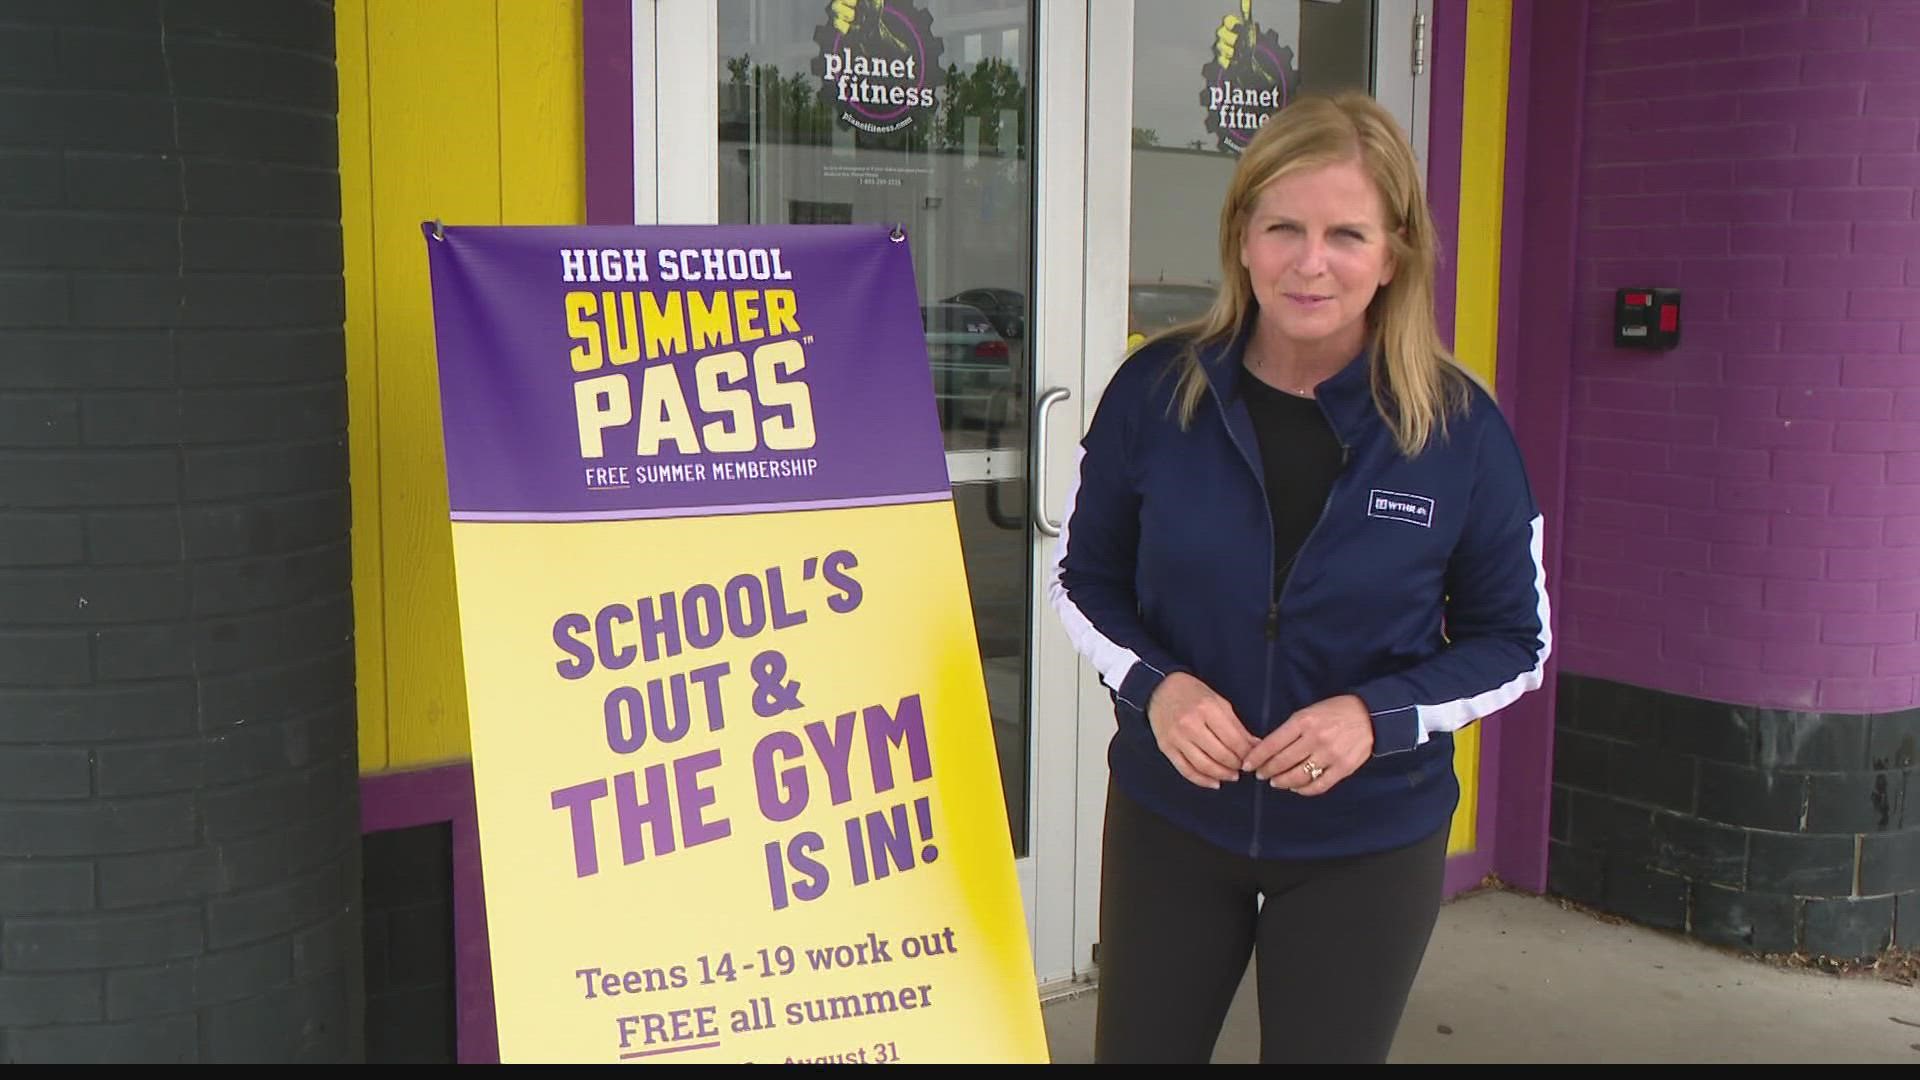 Planet Fitness is helping teenagers stay physically and mentally fit this summer, providing a way to exercise for free while school is out.